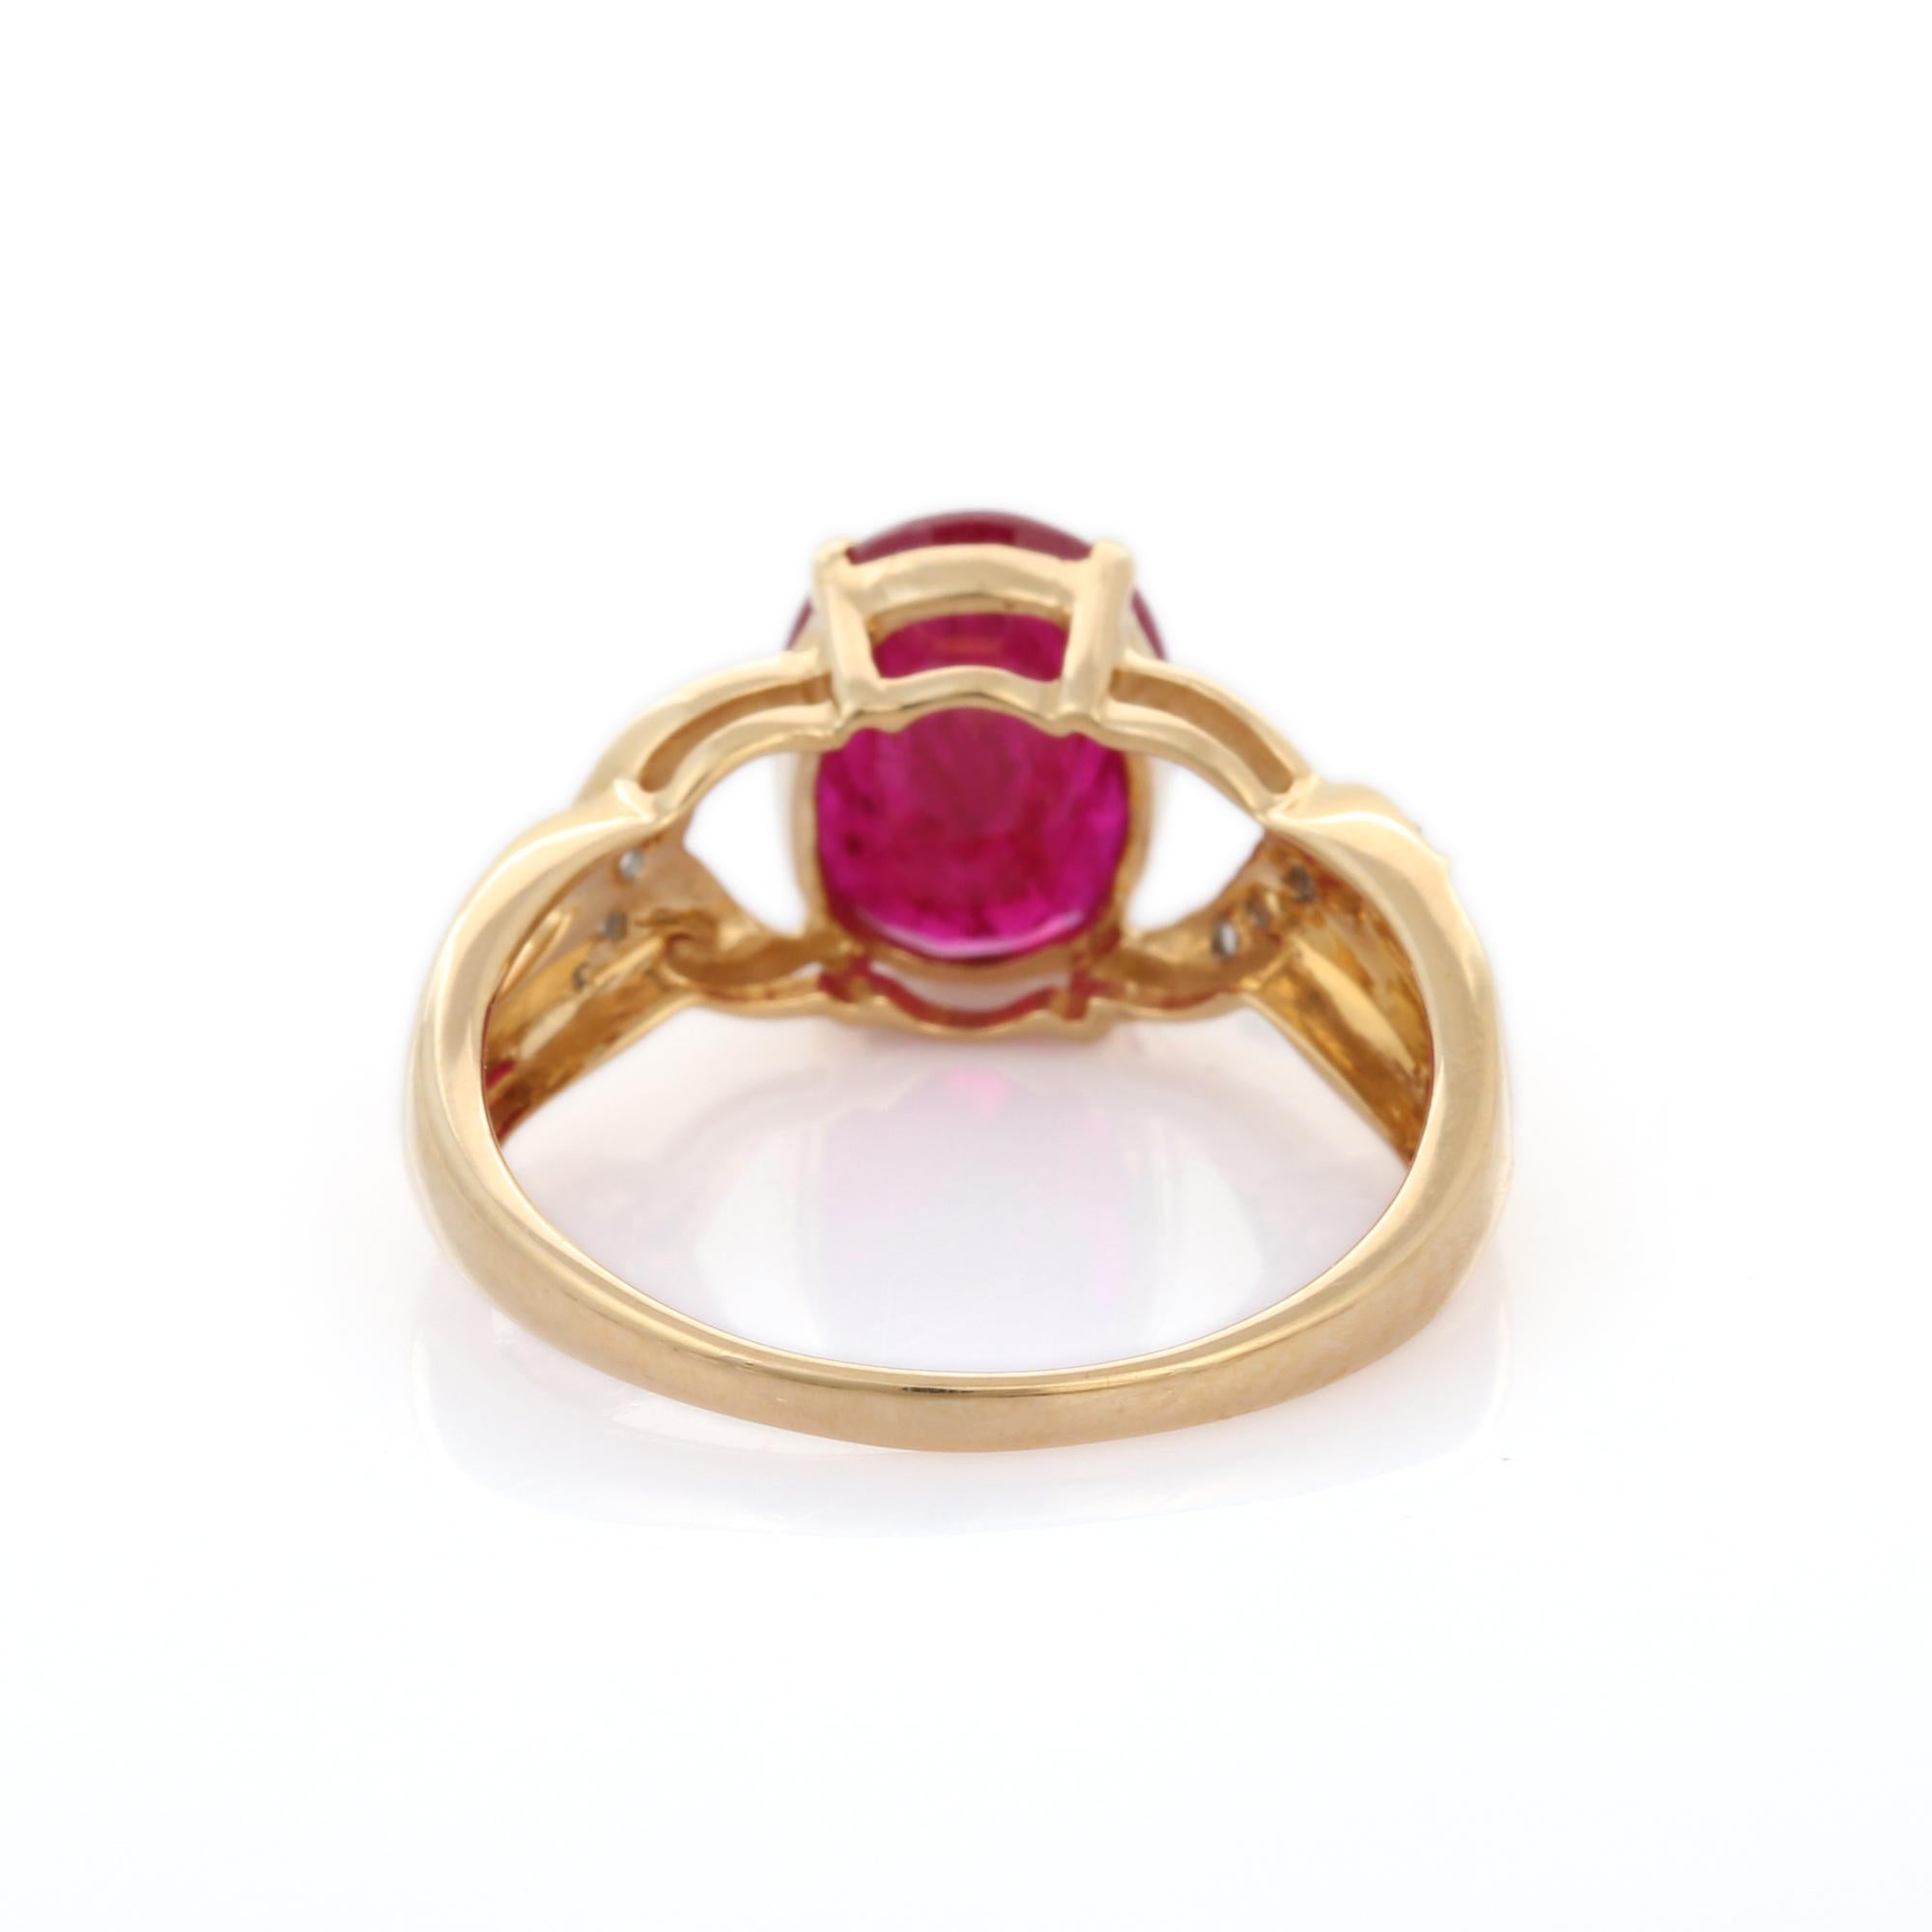 For Sale:  2.28 Carat Ruby Side Wave Diamond Engagement Ring in 18K Yellow Gold 5